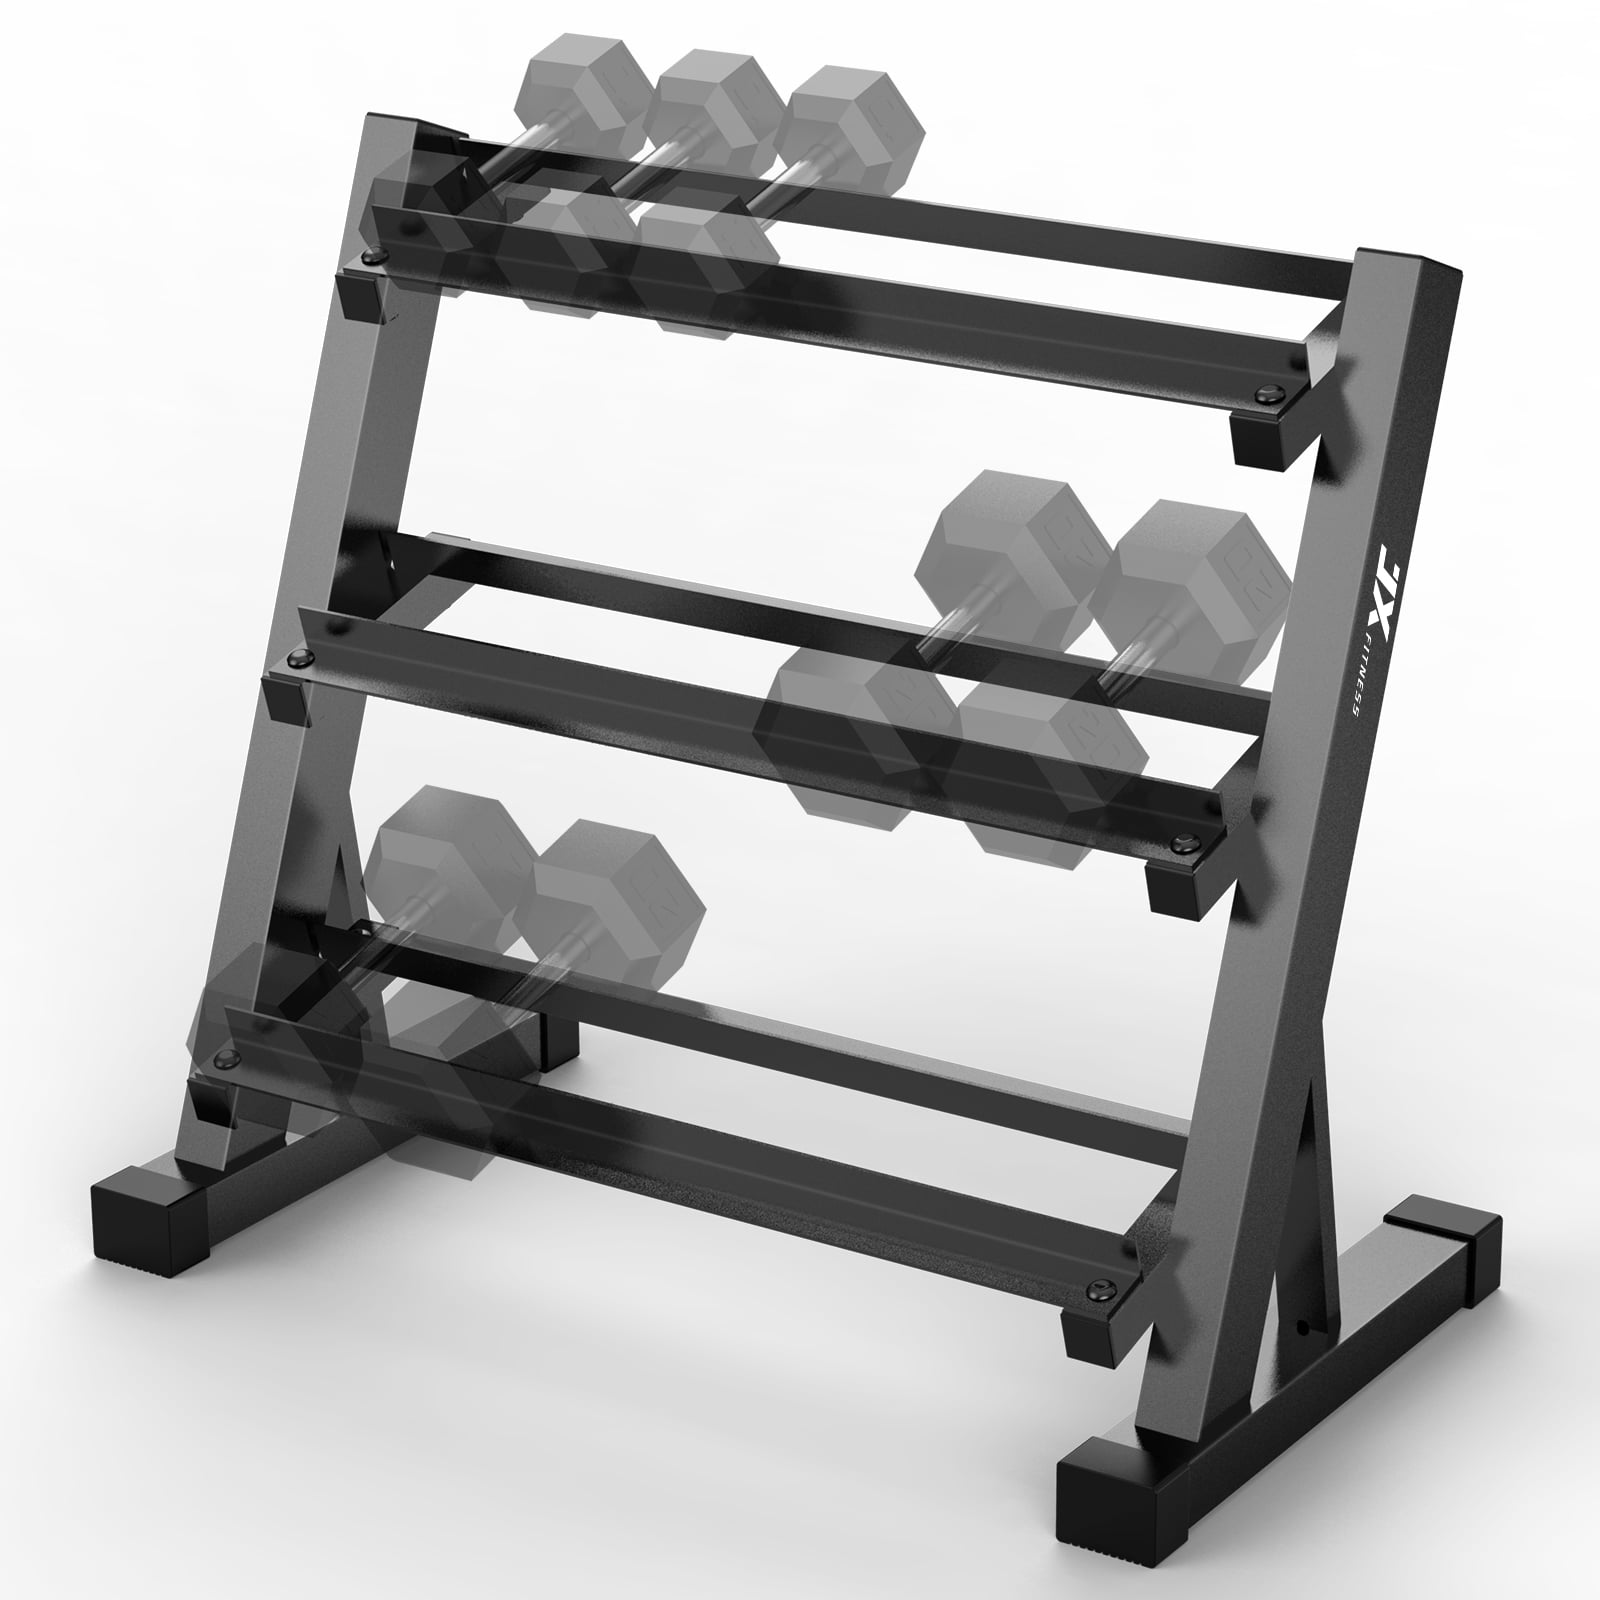 WEILAI Dumbbell Rack Dumbbell Stand Indoor Sports Equipment Mens Home Fitness Gym Equipment Multi-Layer Dumbbell Storage Rack Dumbbell Rack Support Only Sell Shelves Workout Fitness